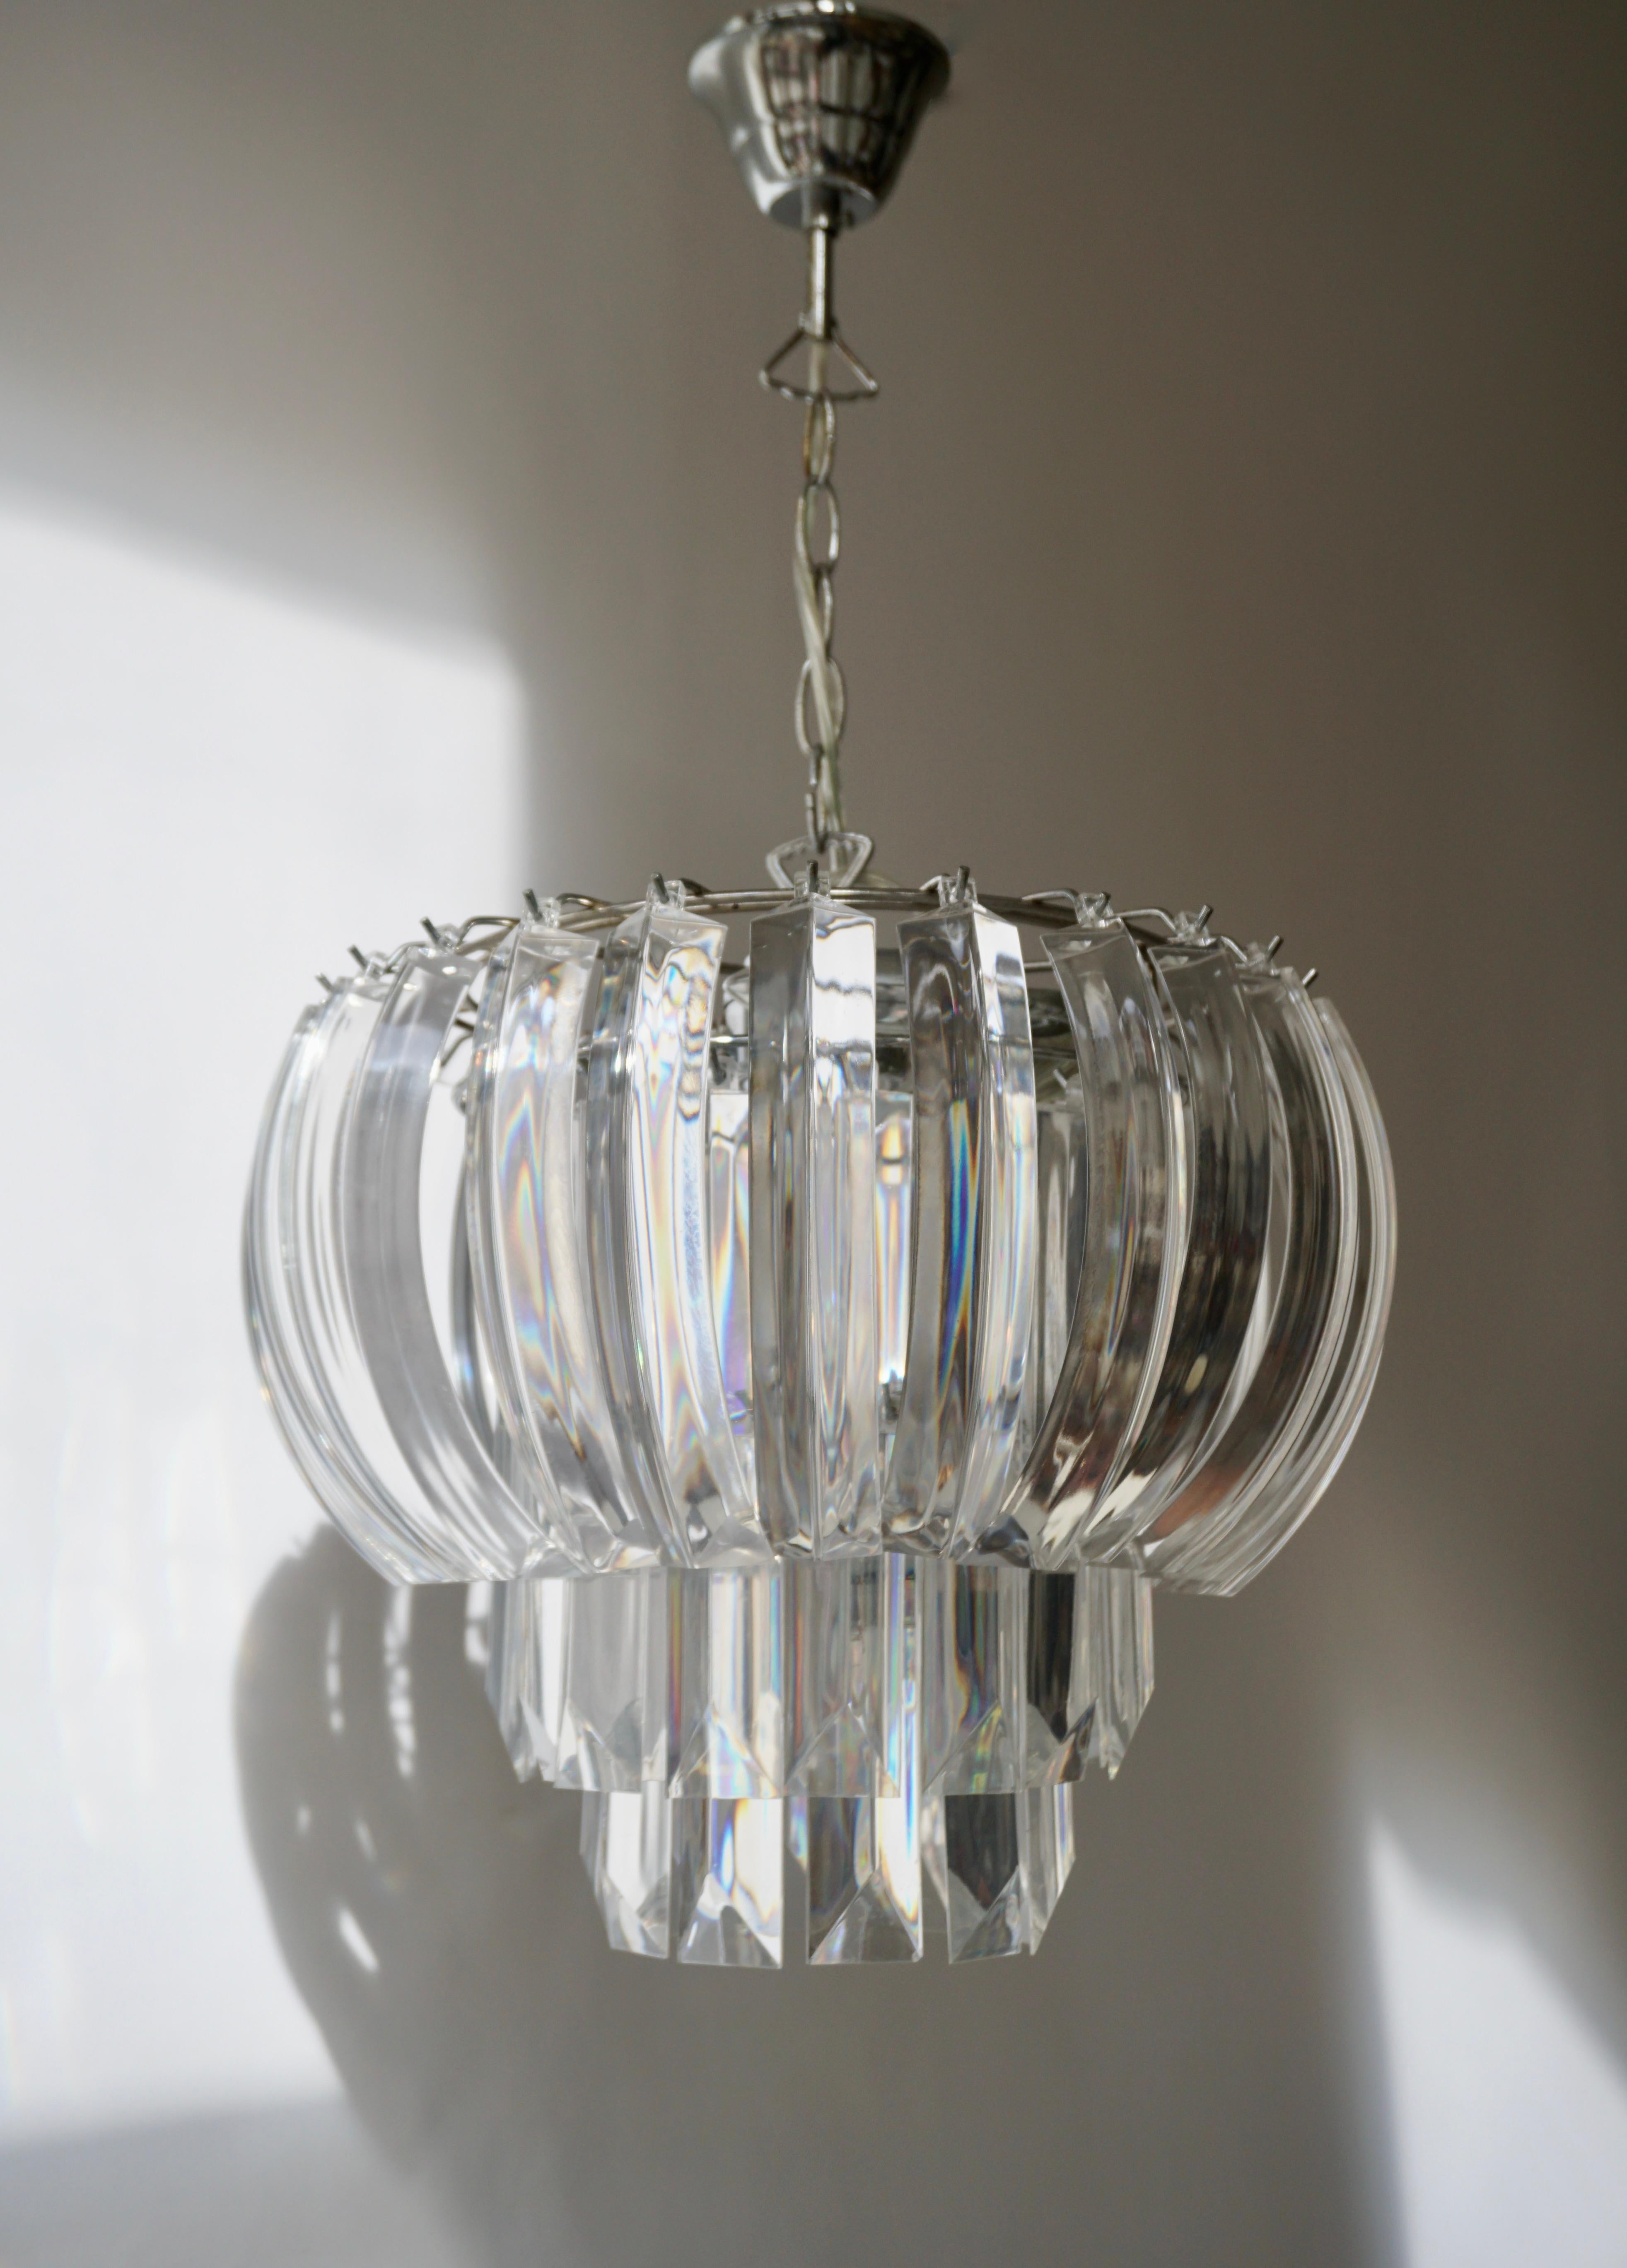 A waterfall chandelier comprised of prismatic plastic sections with angled ends.

Measures: Diameter 38 cm.
Height fixture 30 cm.
Total height including the chain and canopy 80 cm.
The light requires three single E14 screw fit light bulbs